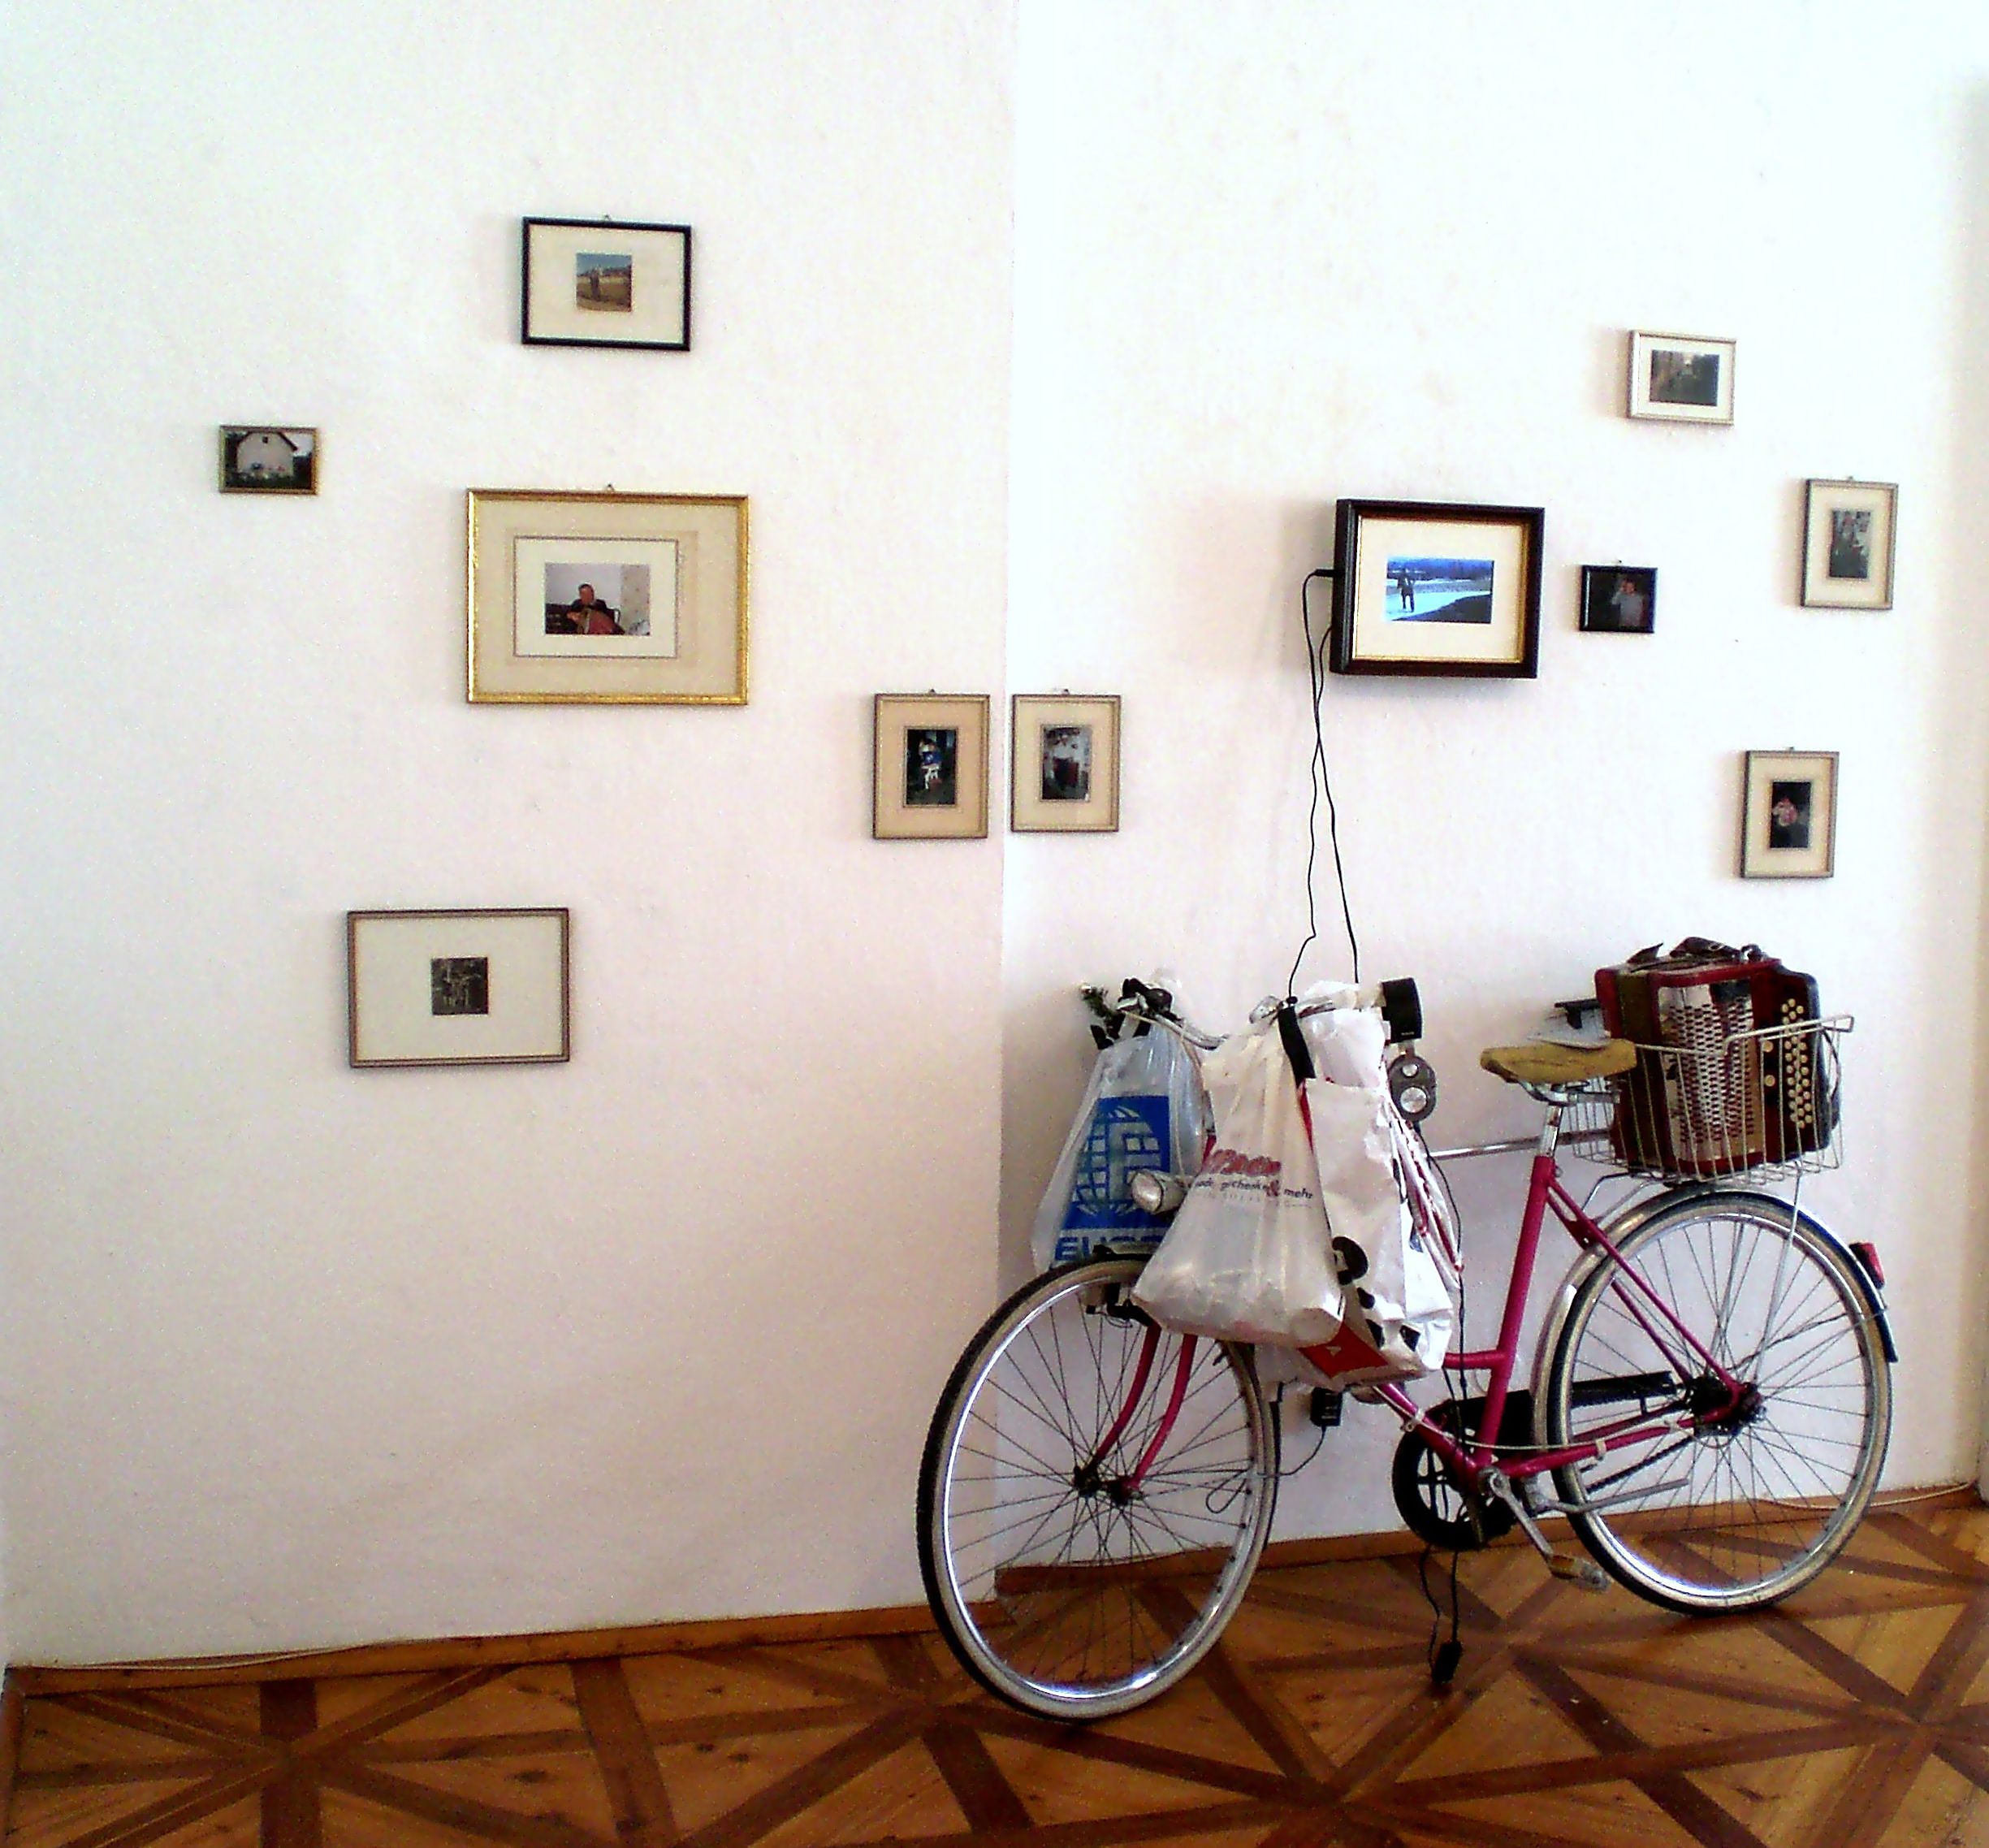 Familiensilber, Galerie3, photos of my grandaddy and his bicycle 100%, 8mm film, myself as grandaddy playing the quetschn, 2012 .jpg